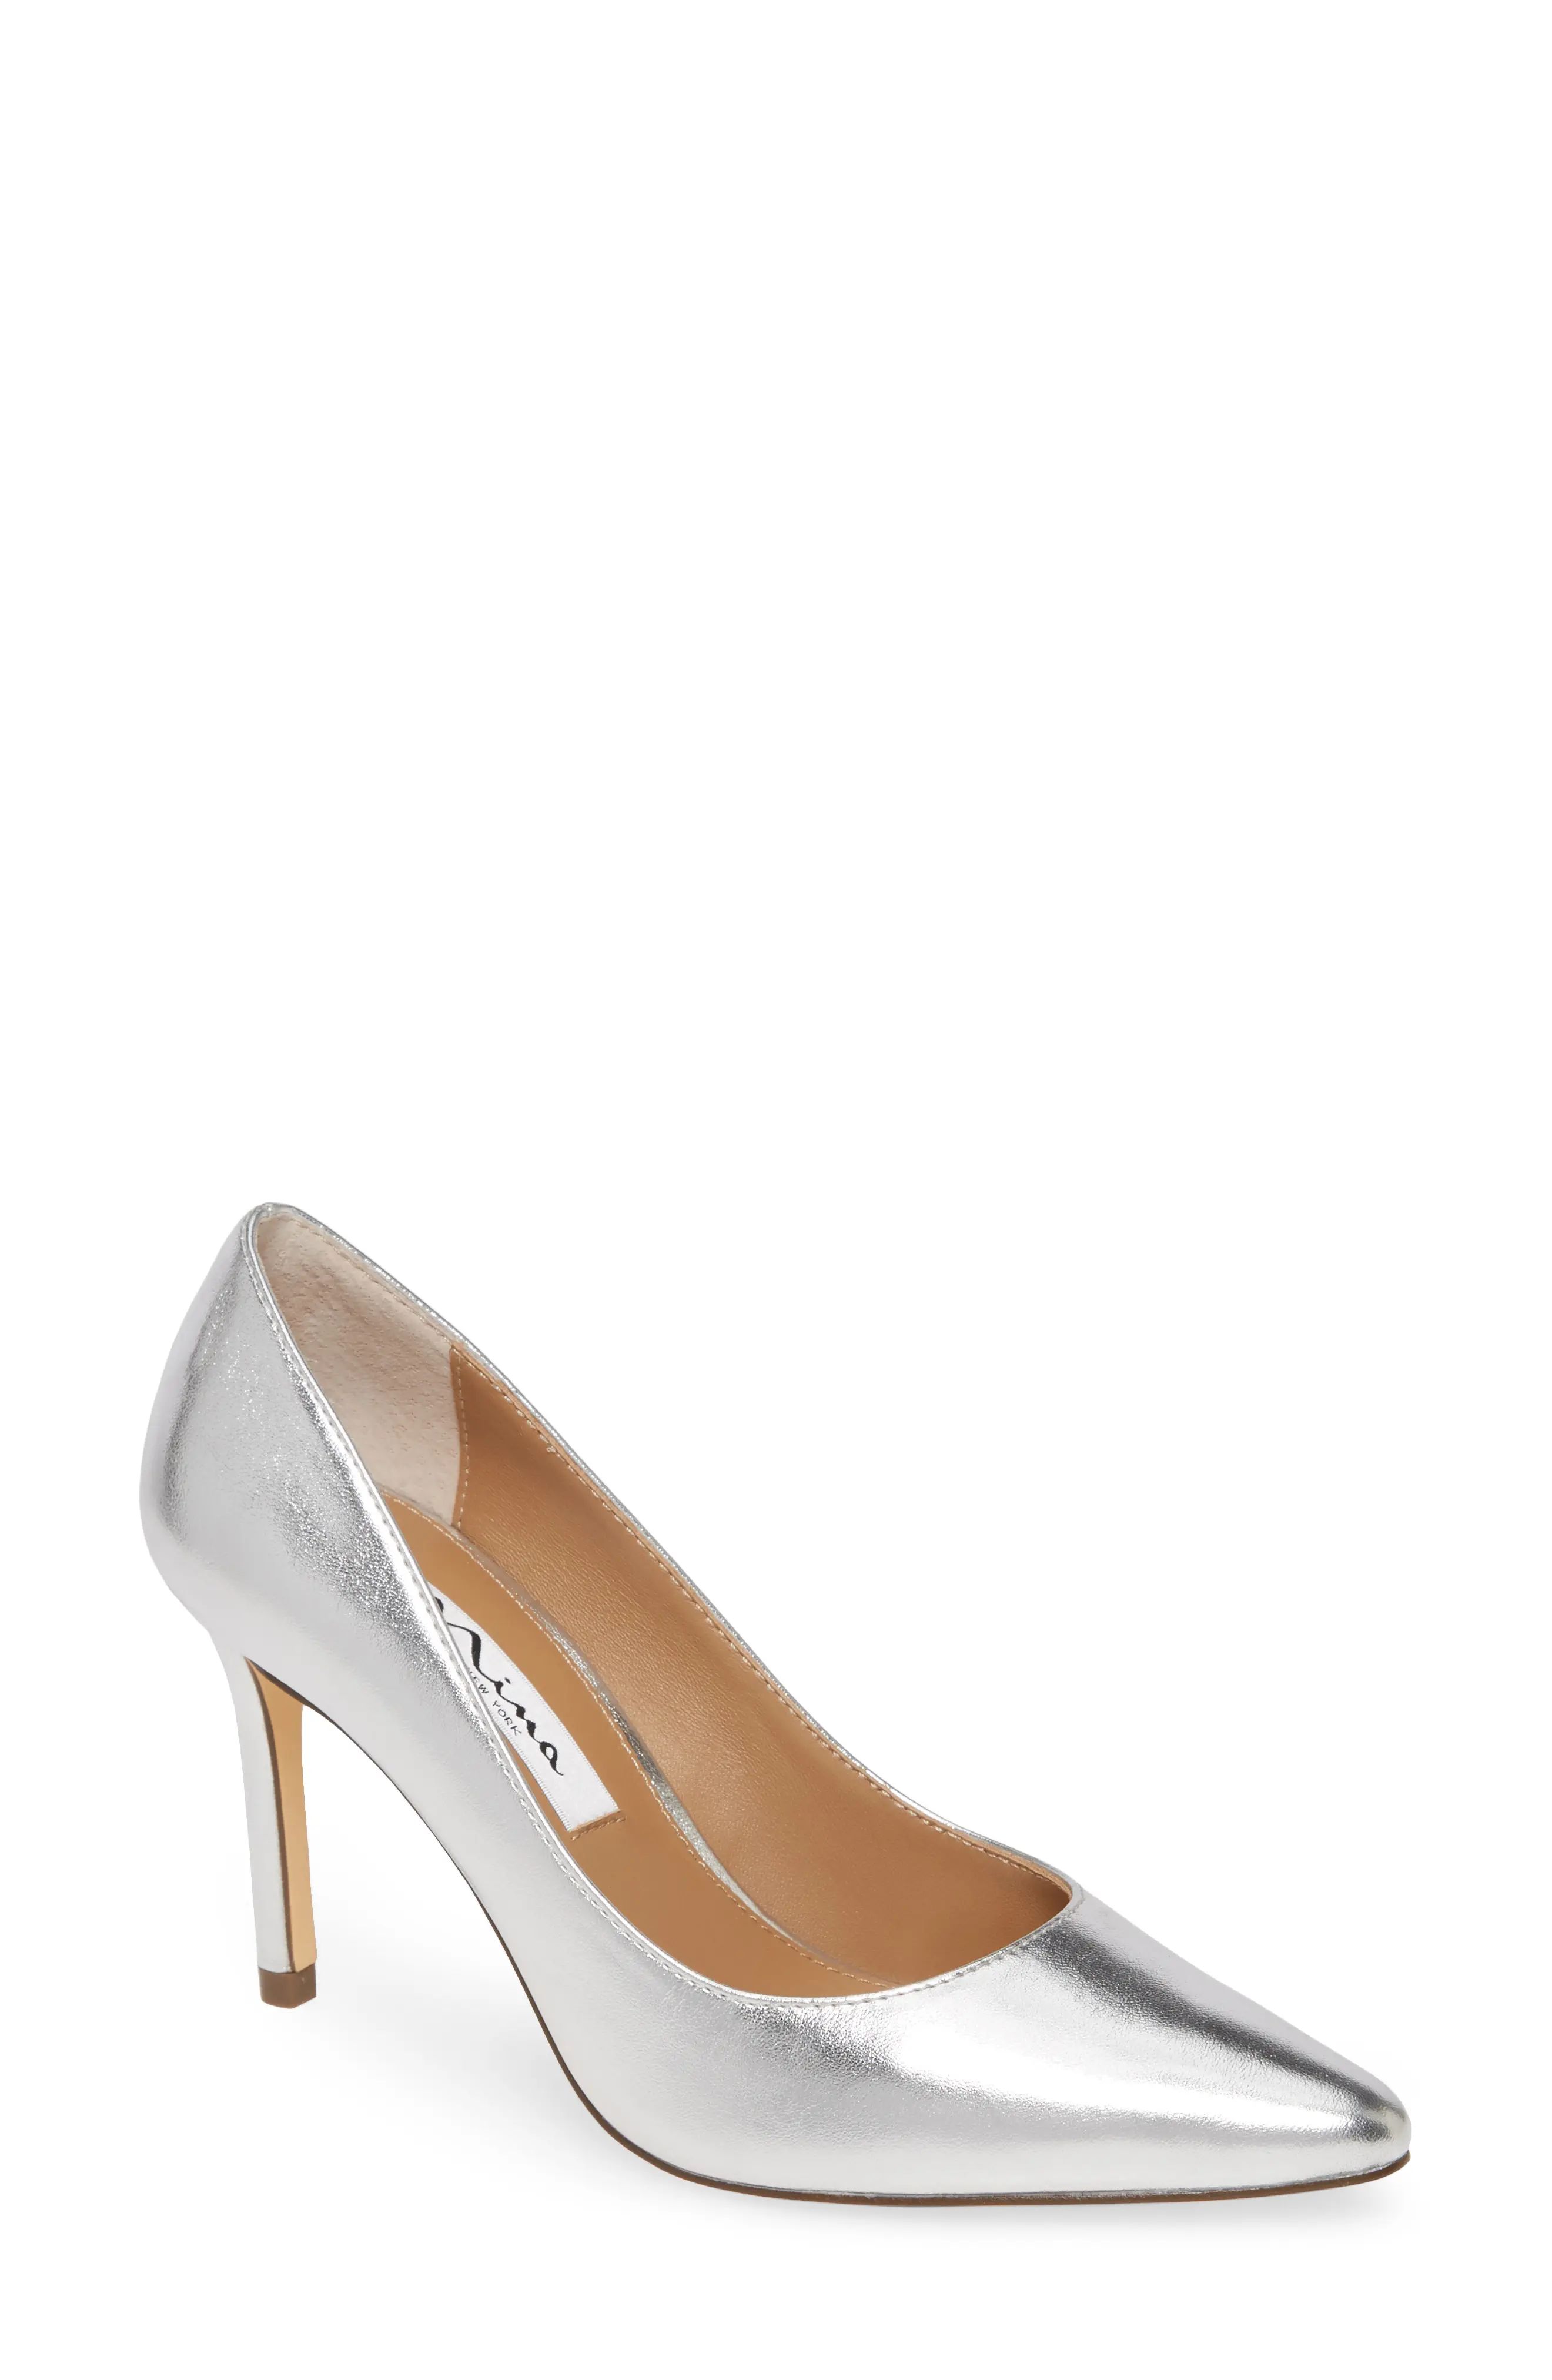 Nina 85 Pointy Toe Pump in Silver Fabric at Nordstrom | Nordstrom